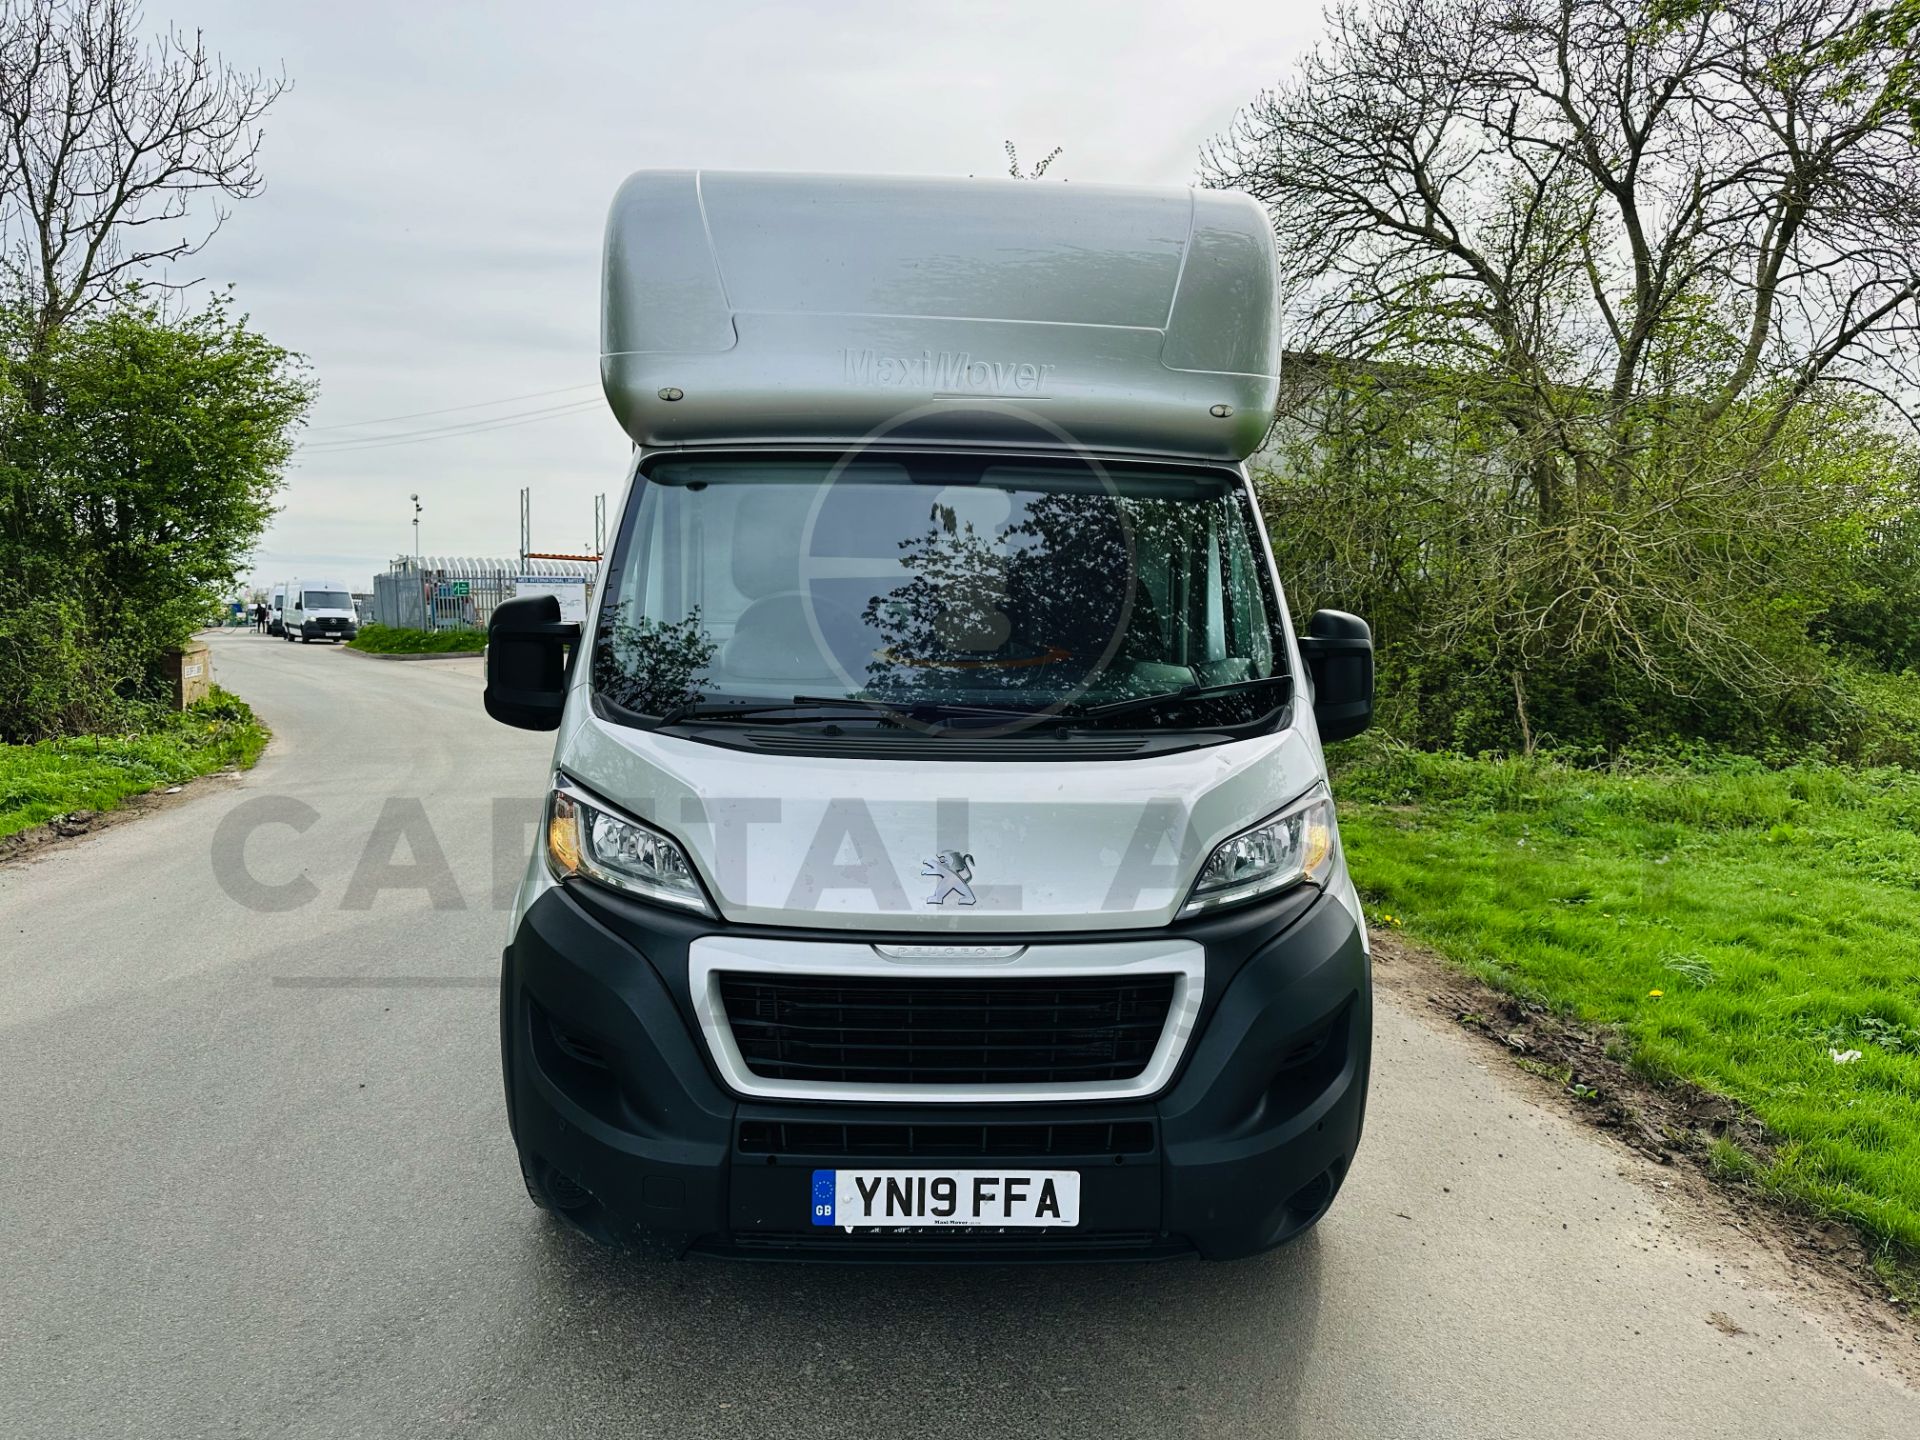 PEUGEOT BOXER 335 *LWB - LOW LOADER / MAXI MOVER LUTON* (2019 - EURO 6) 2.0 BLUE HDI - 6 SPEED *A/C* - Image 3 of 27